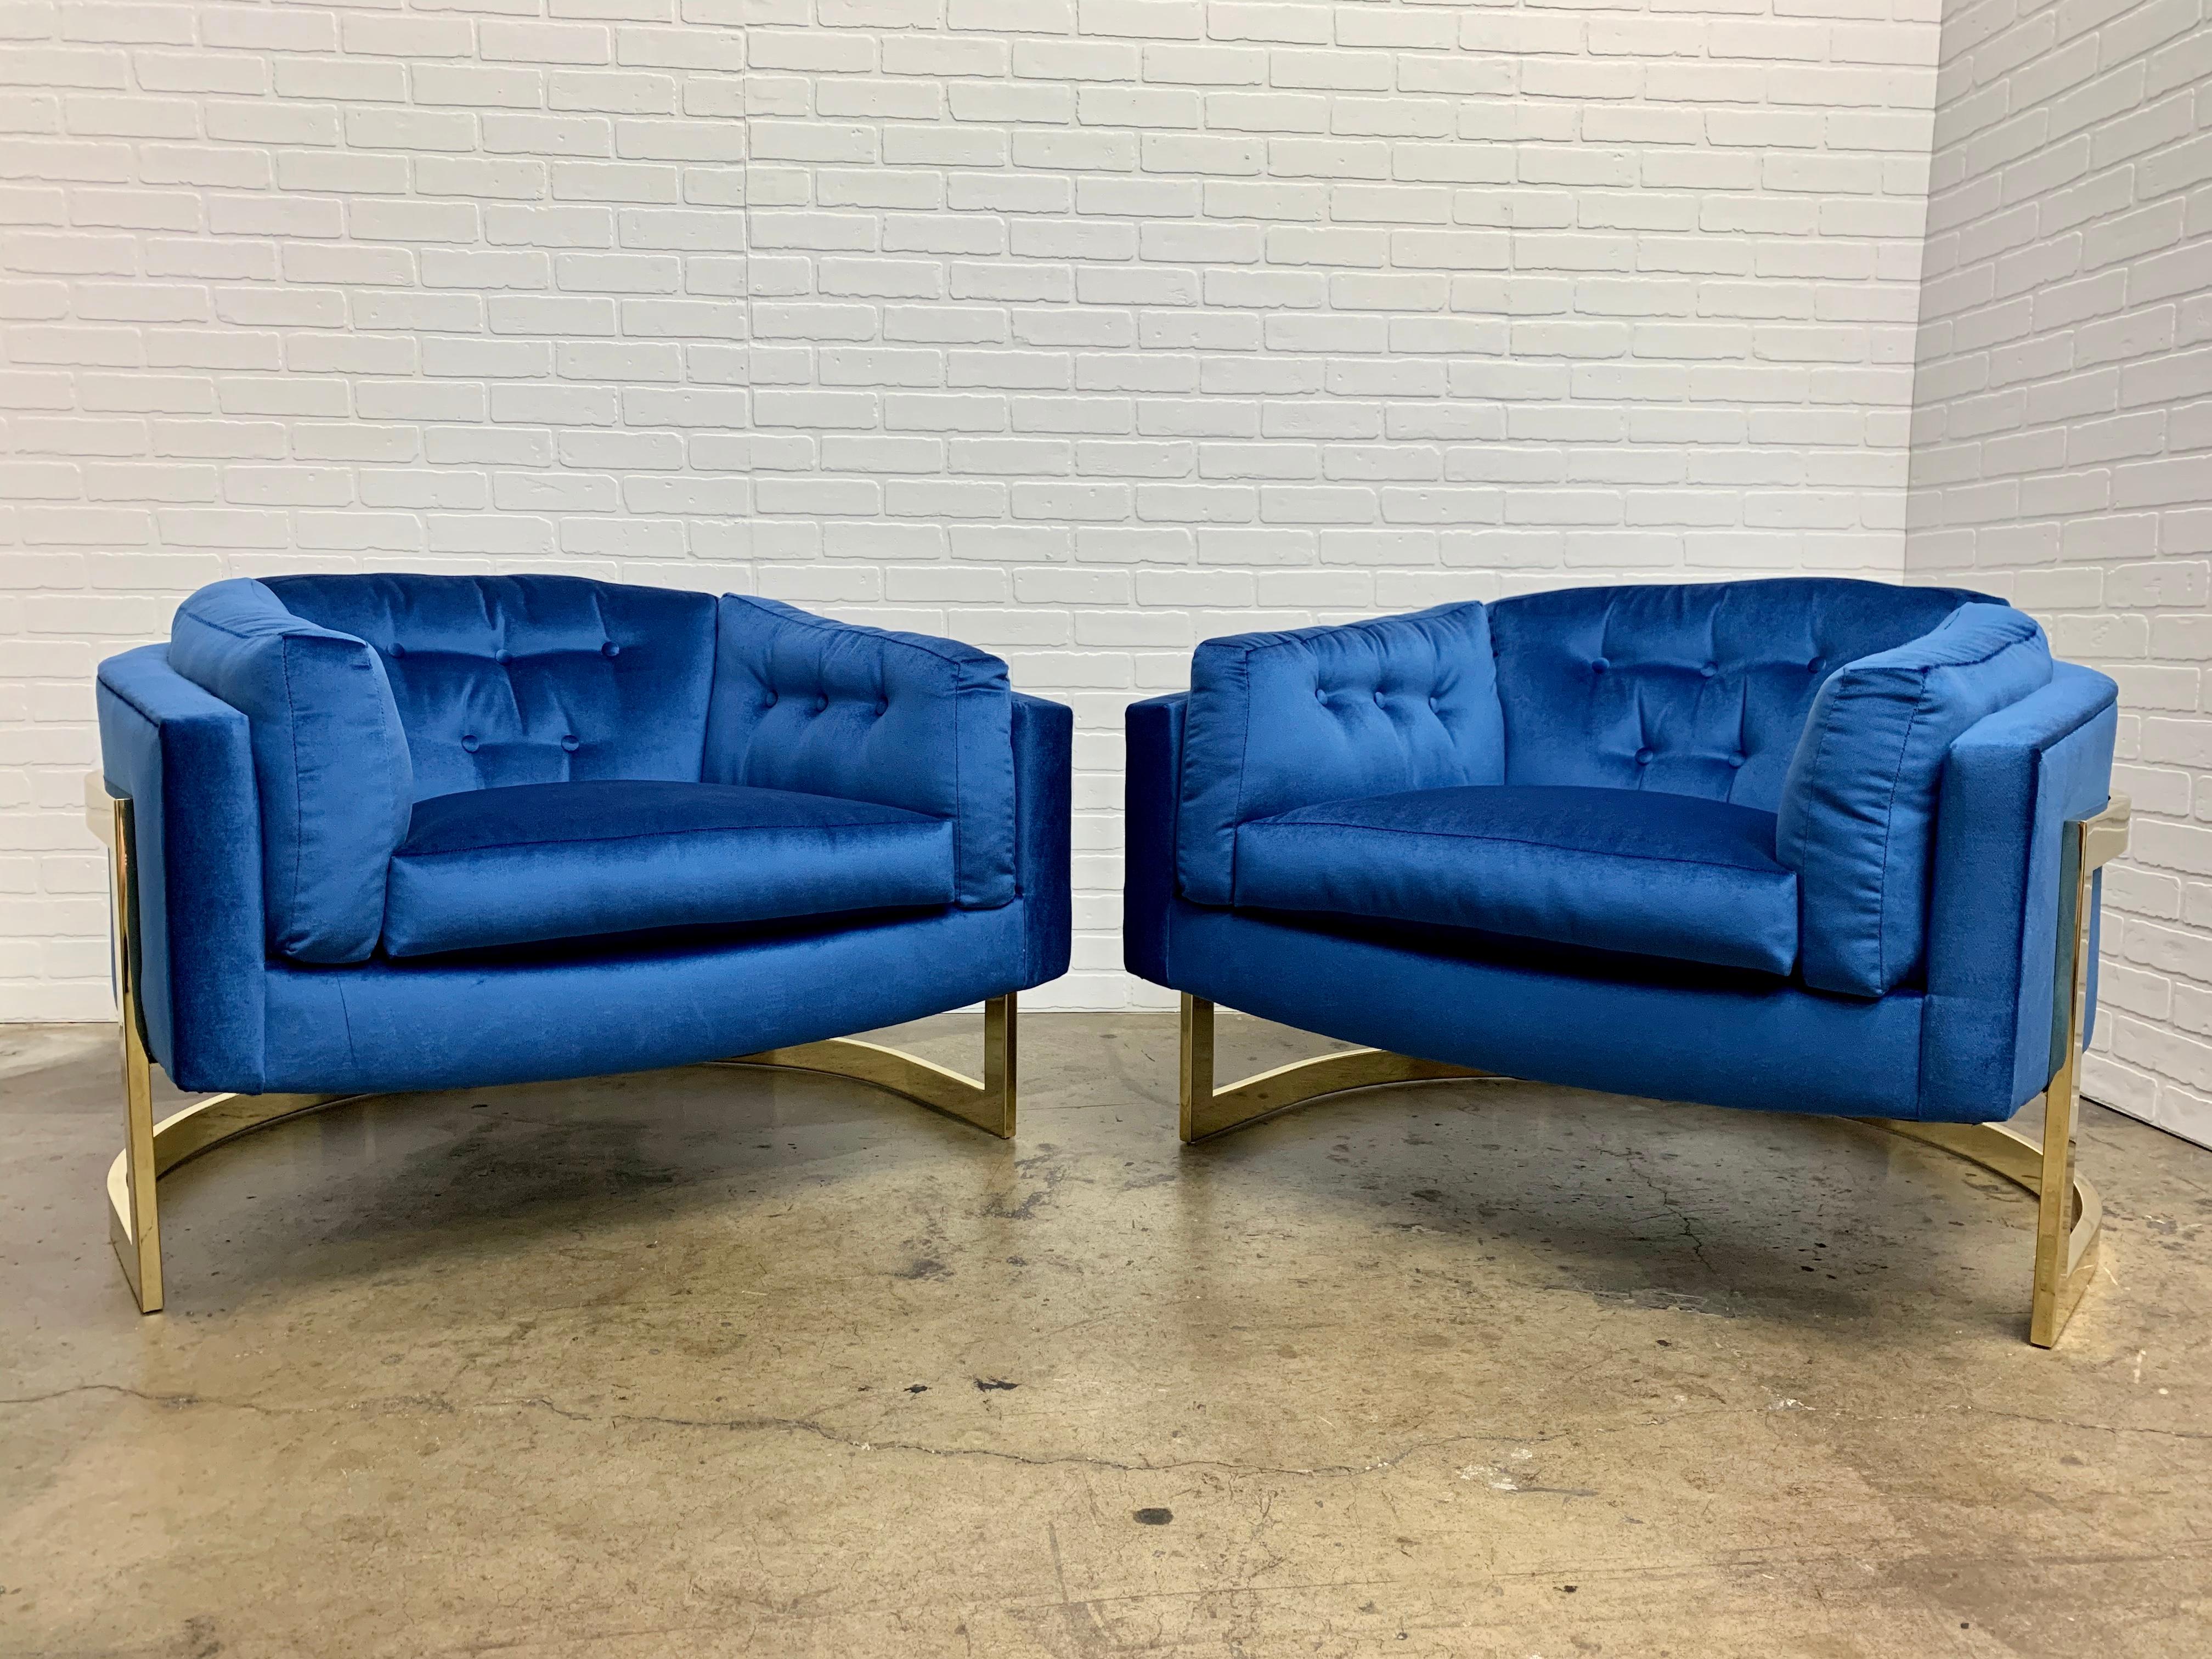 Brass-plated cantilevered frames with blue tufted velvet by Metropolitan Furniture, 1970s. The frames are newly re-plated and sealed with two part polyurethane also new upholstery.